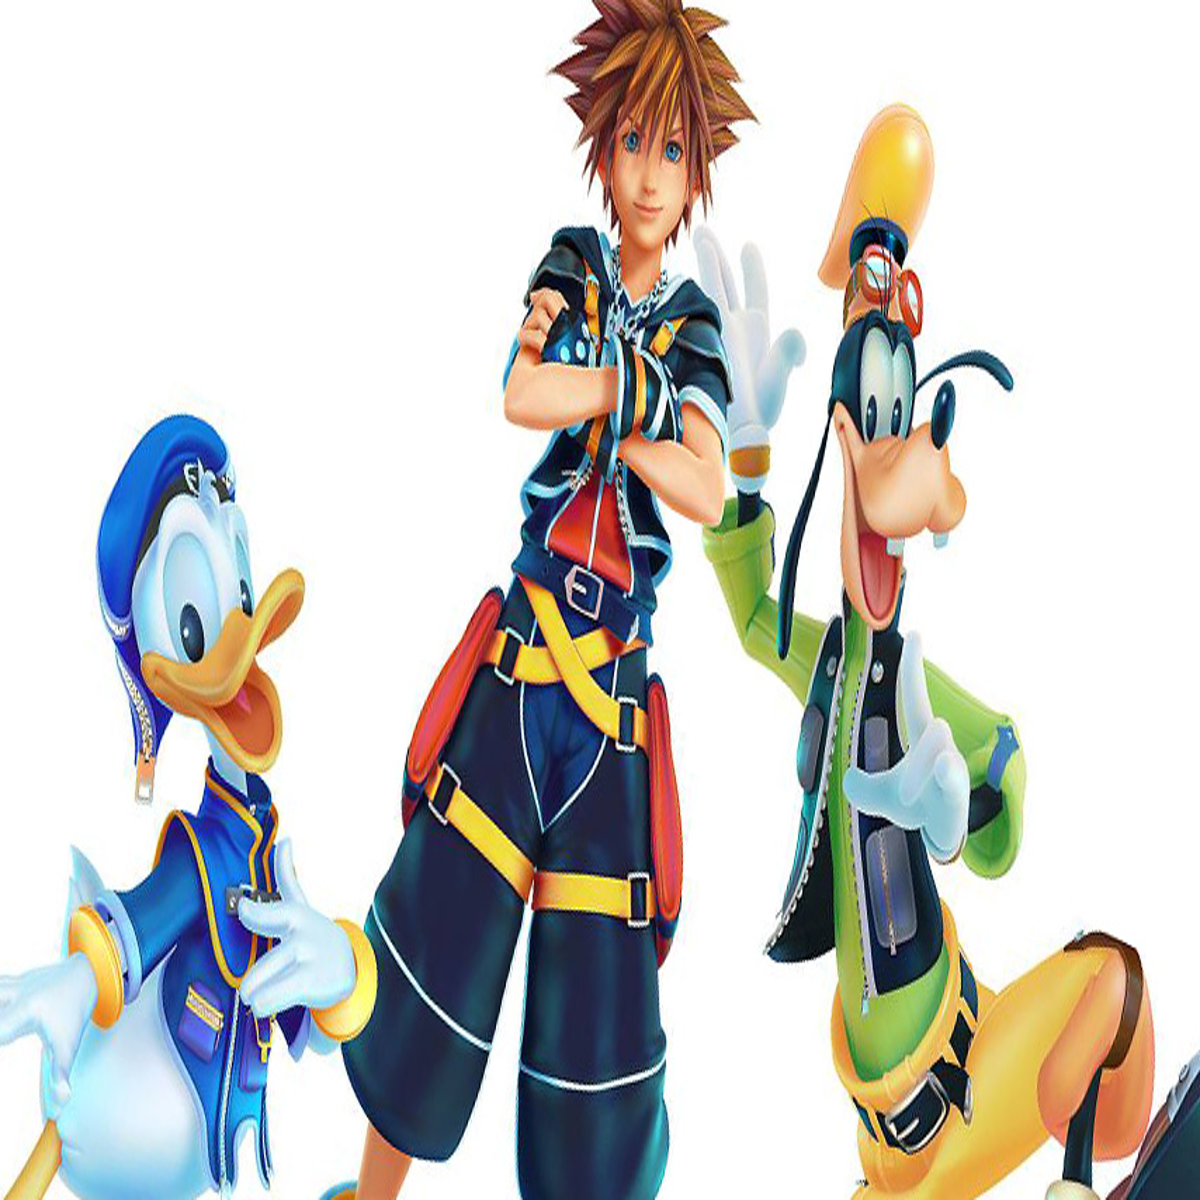 KINGDOM HEARTS HD 1.5 + 2.5 REMIX (2017 PS4) KH DISNEY MICKEY DONALD GOOFY  SONY - video gaming - by owner 